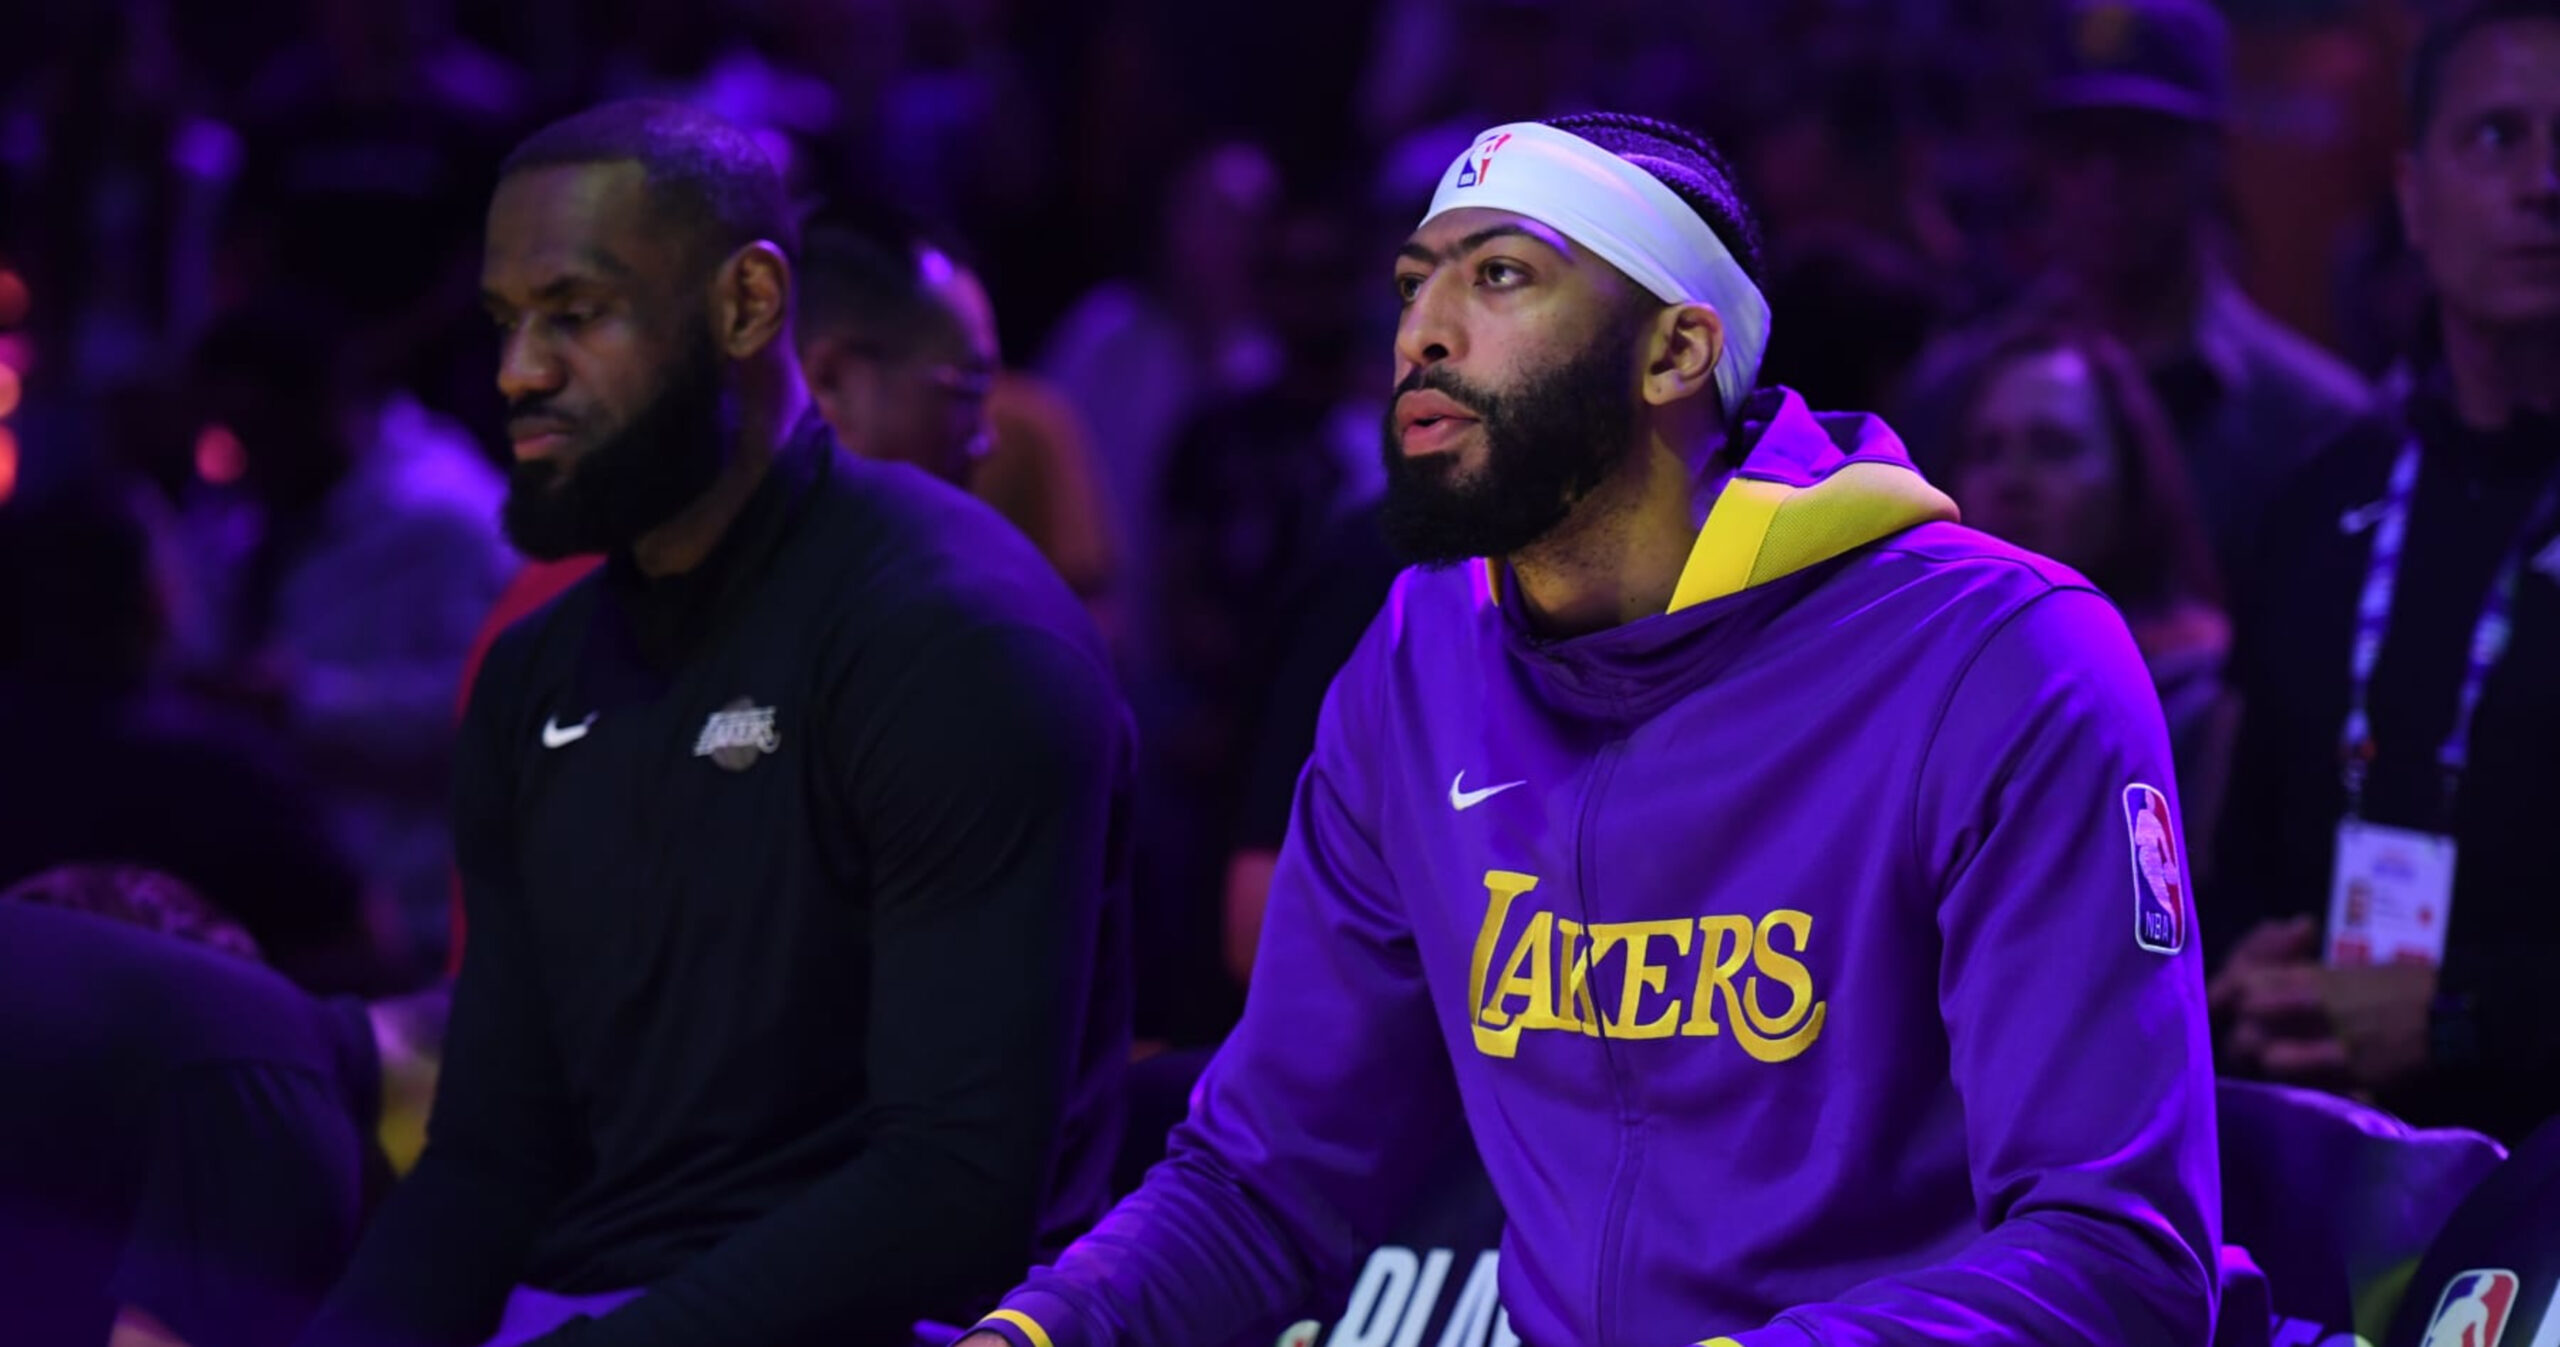 Lakers’ Anthony Davis Discusses Hip Injury Suffered vs. Heat: ‘I’ll Be Fine’